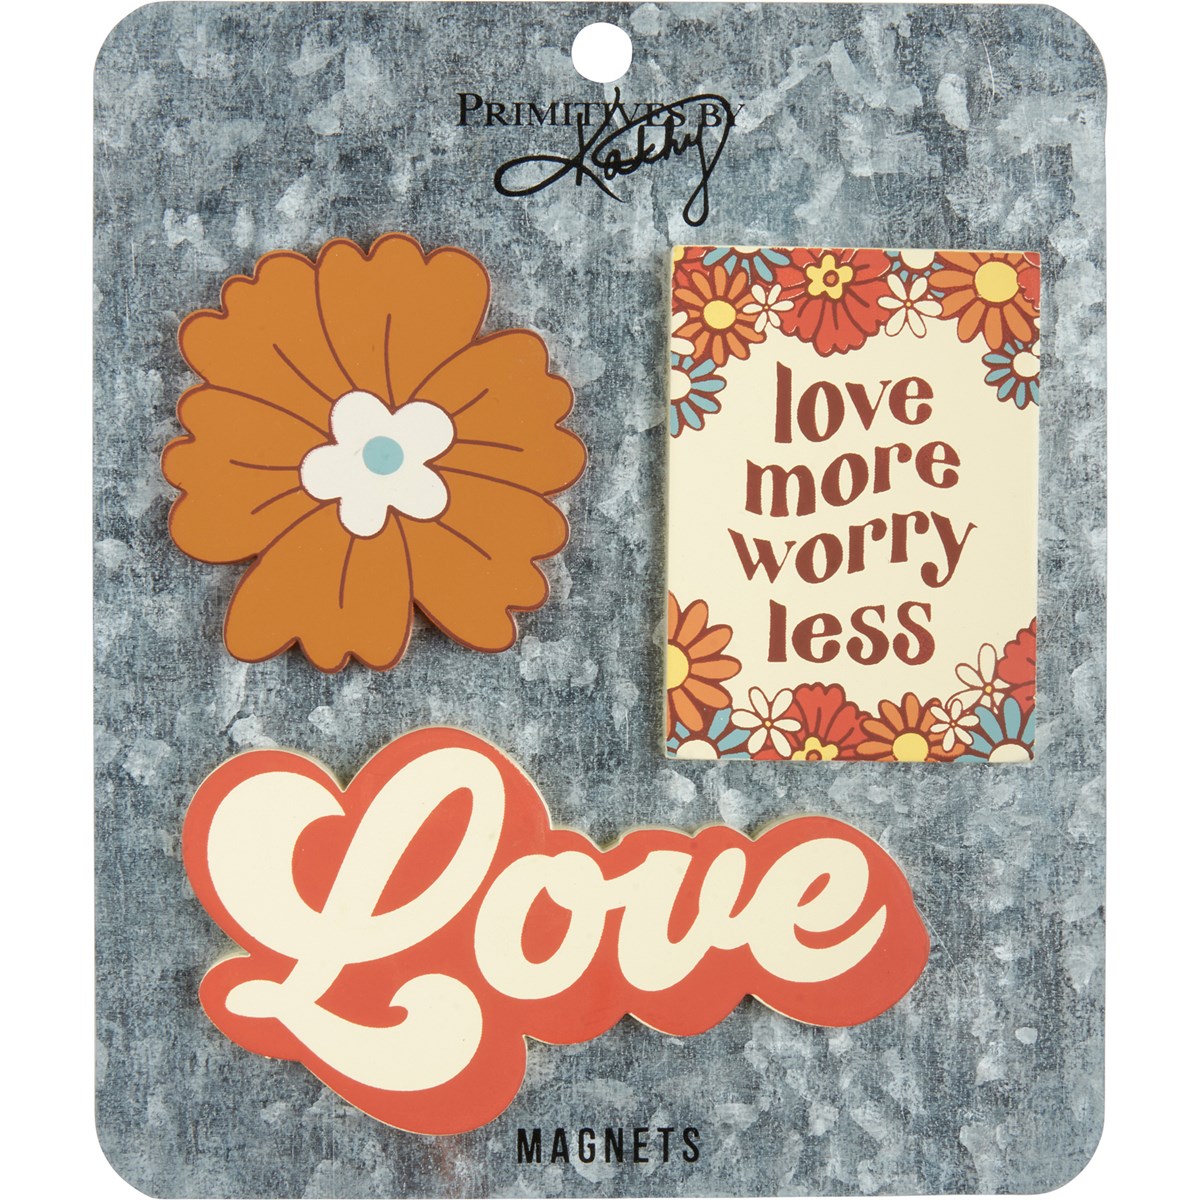 Magnet Set - Love More Worry Less - 4" x 2.25", 2.50" x 2.50", 2" x 2.75", Card: 5.50" x 6.50" - Wood, Metal, Magnet